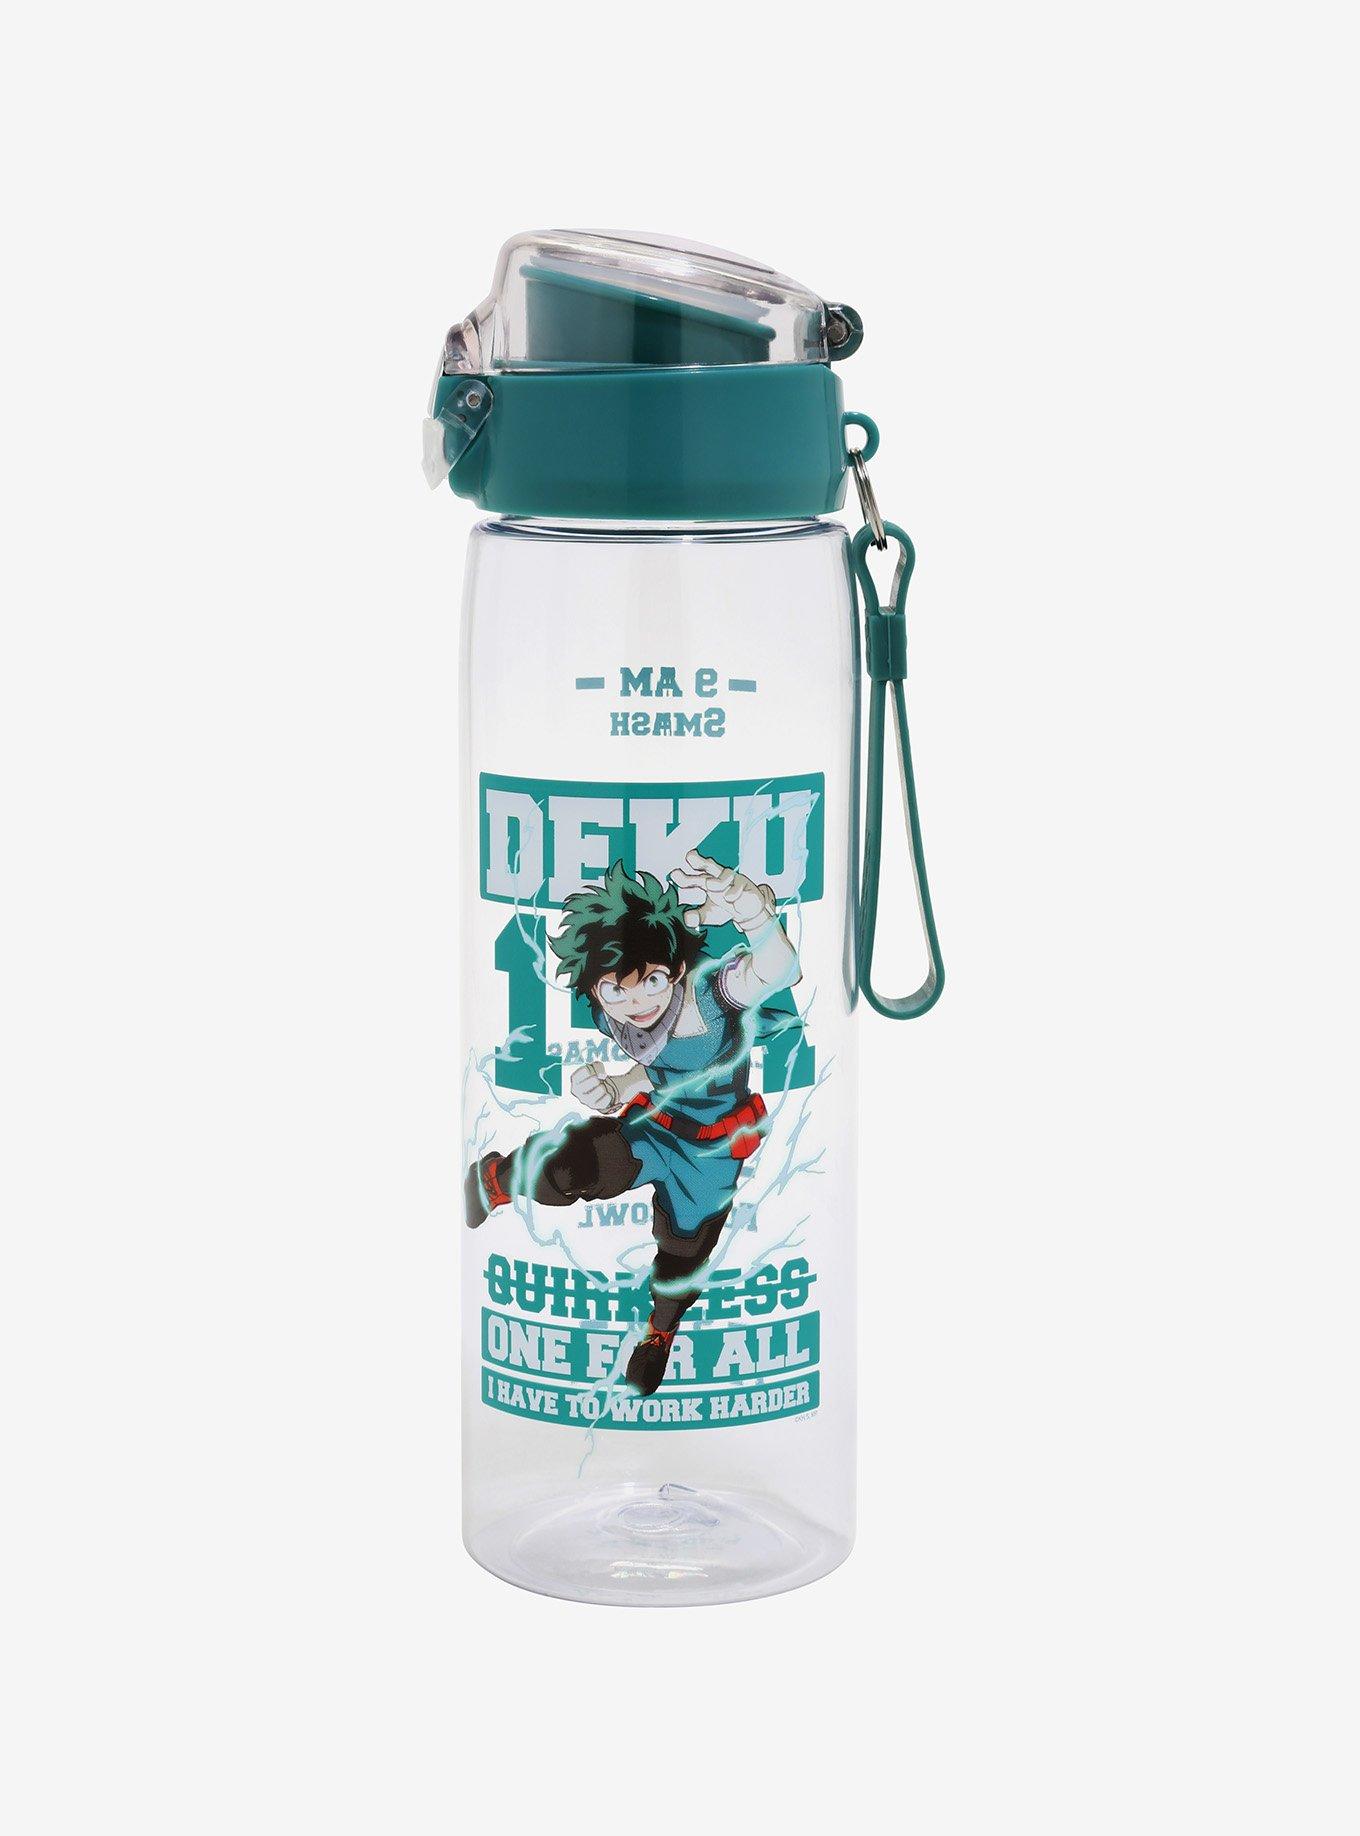 The Hydration Tracking Water Bottle